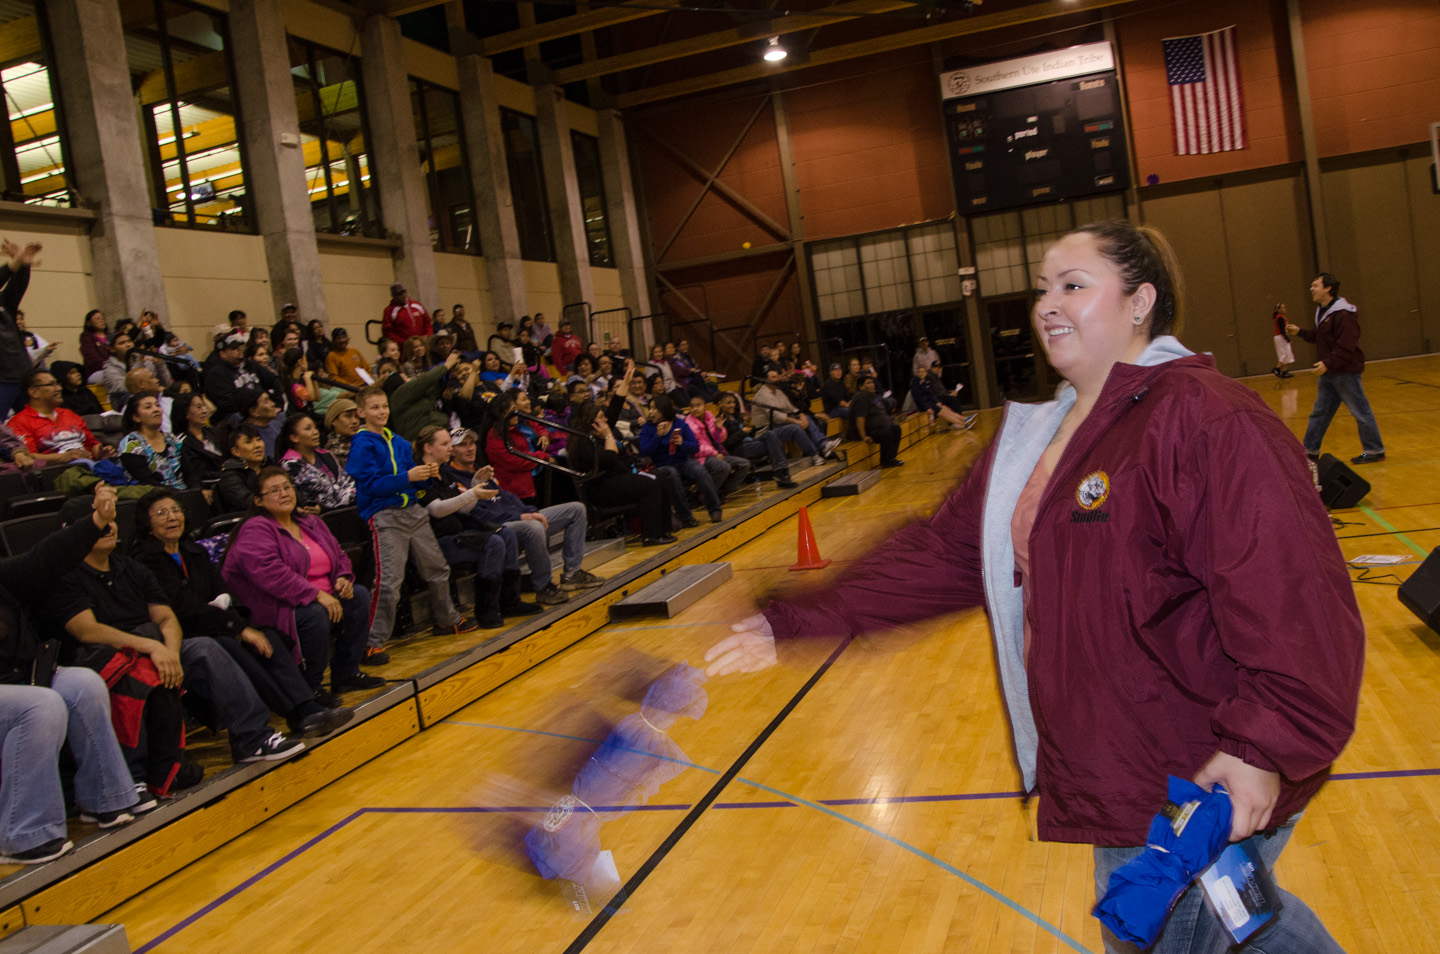 SunUte Community Center employees handed out door prizes and giveaways to the young players and their families.